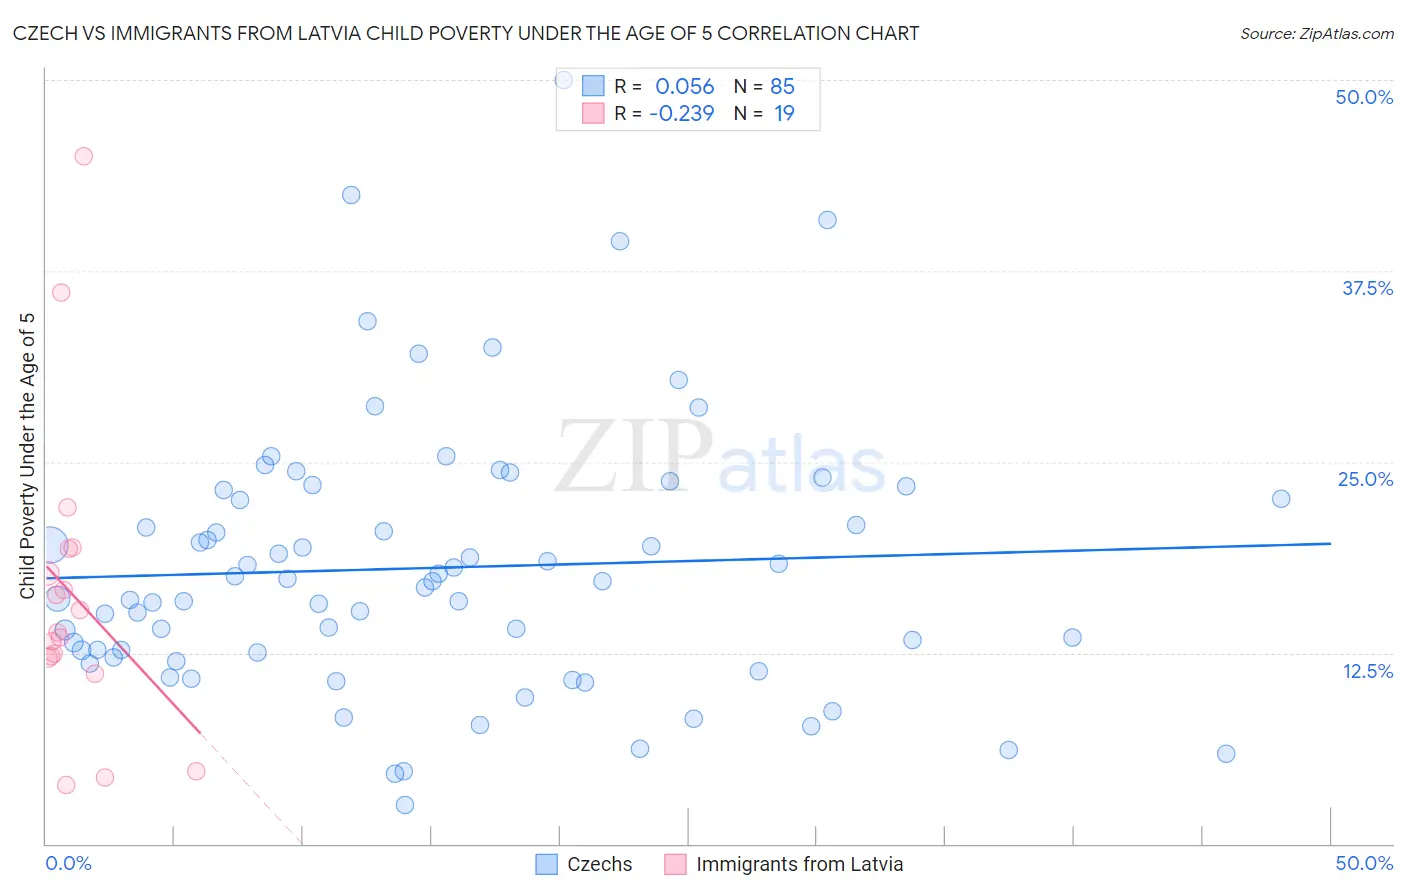 Czech vs Immigrants from Latvia Child Poverty Under the Age of 5